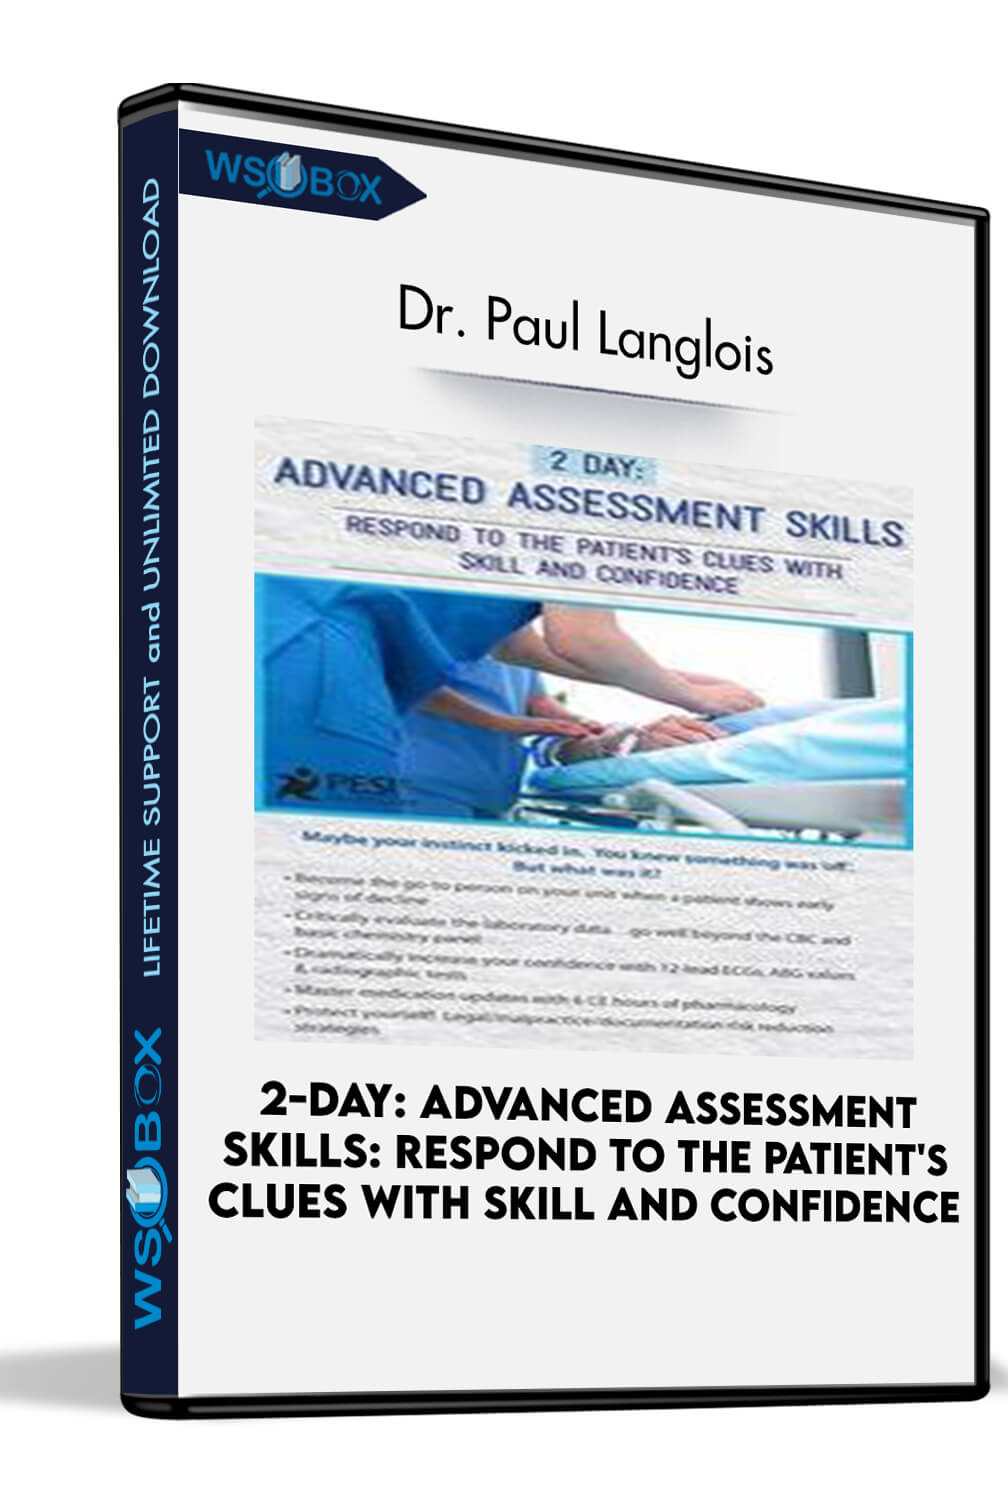 2-Day: Advanced Assessment Skills: Respond to the Patient’s Clues with Skill and Confidence – Dr. Paul Langlois